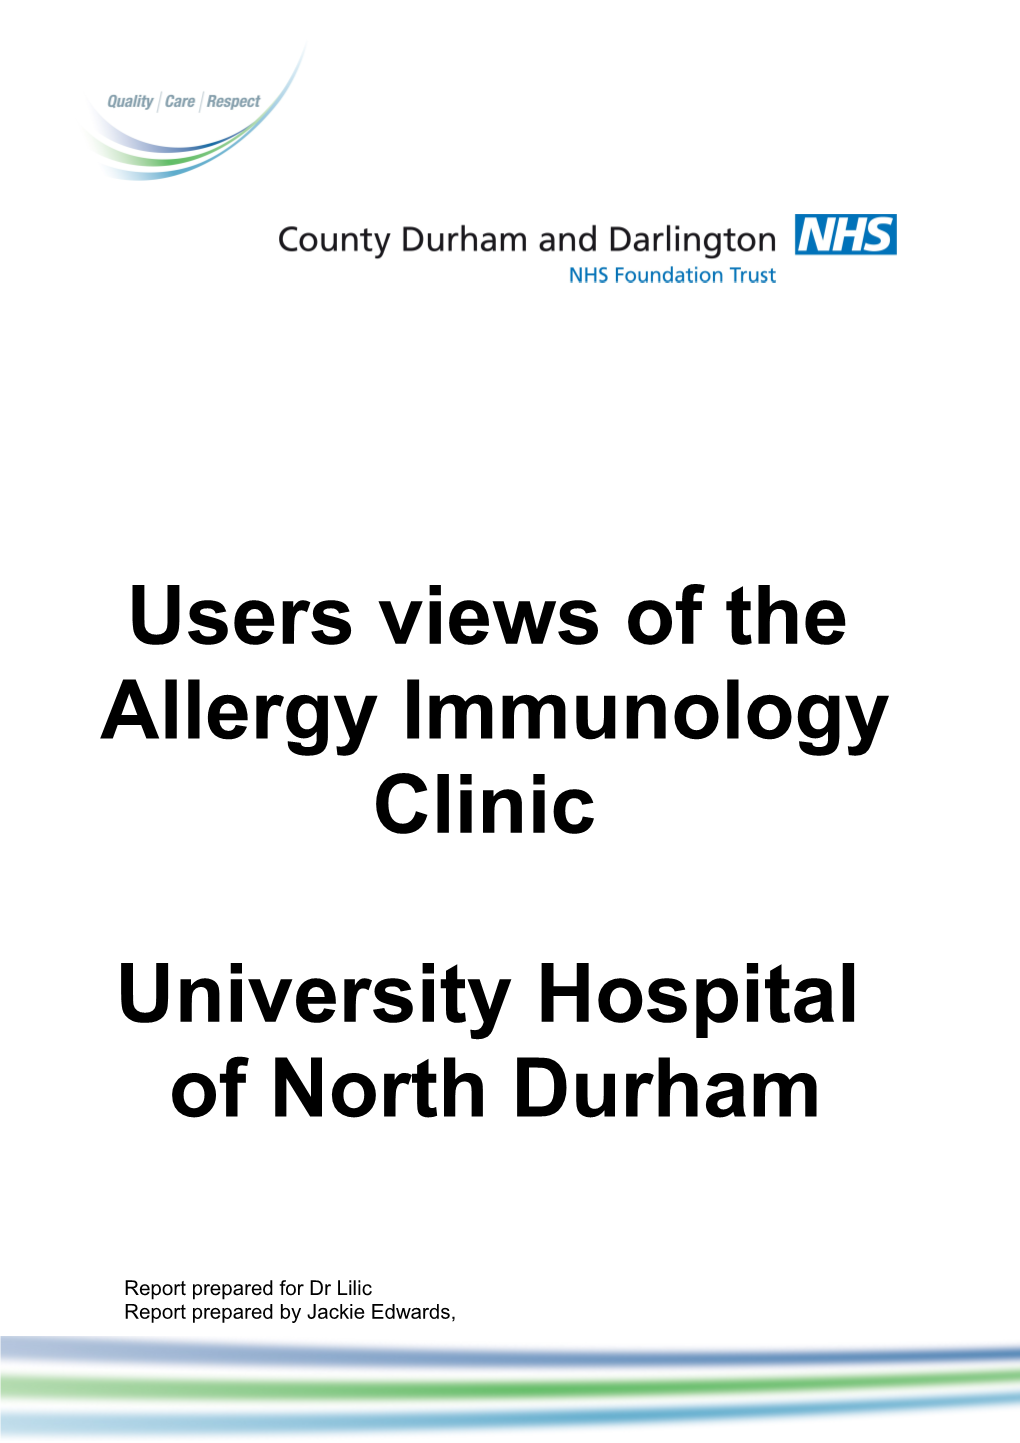 Users Views of the Allergy Immunology Clinic